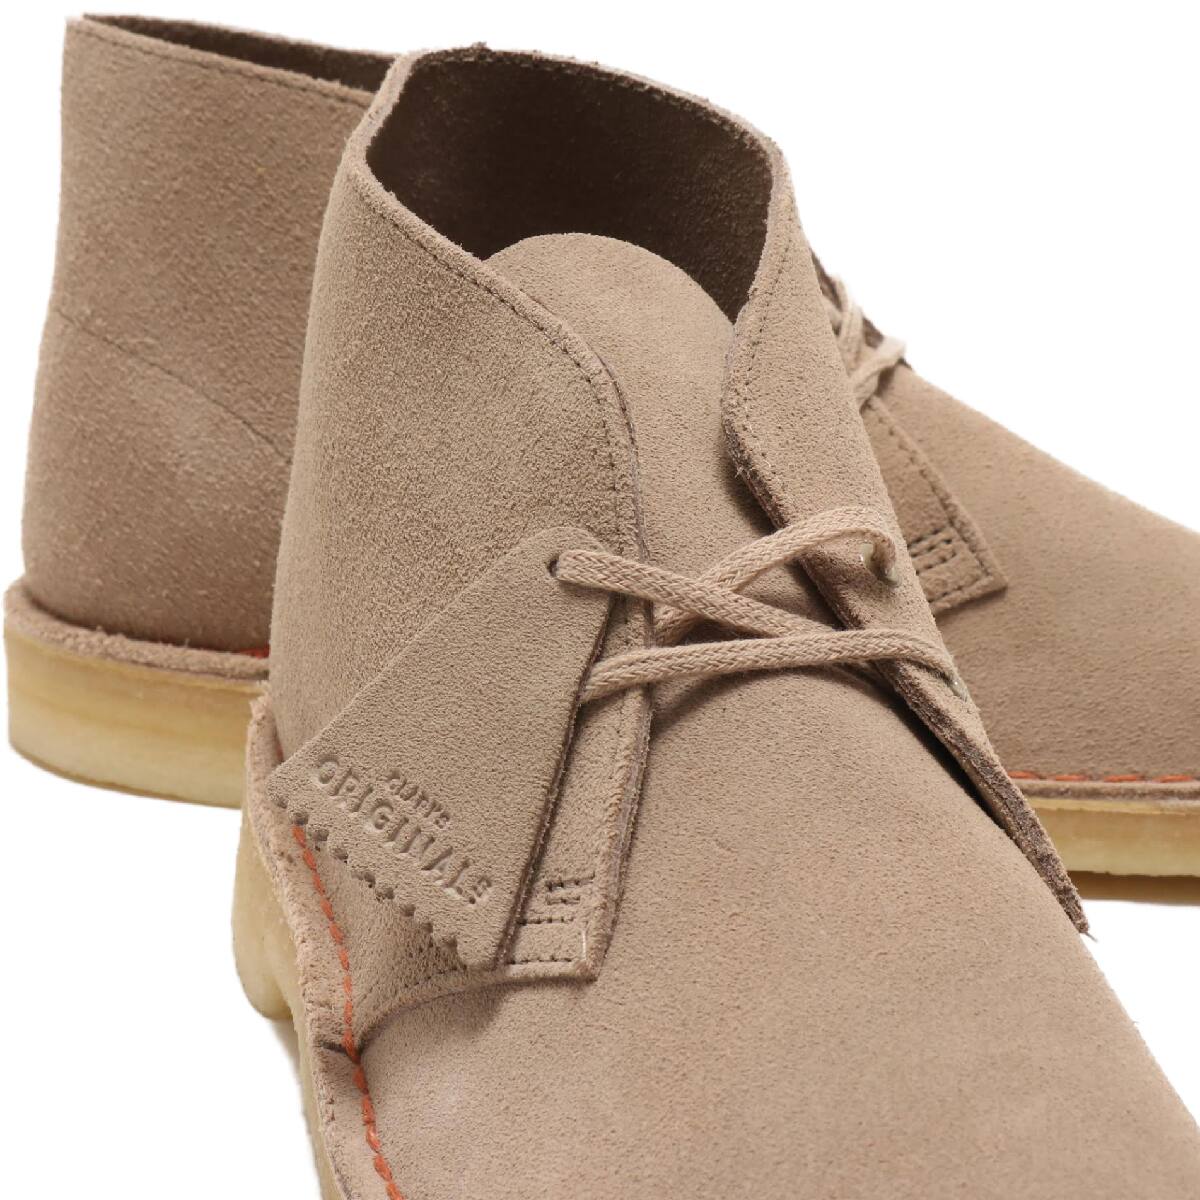 Clarks DESERT BOOT SAND SUEDE 19FA-I